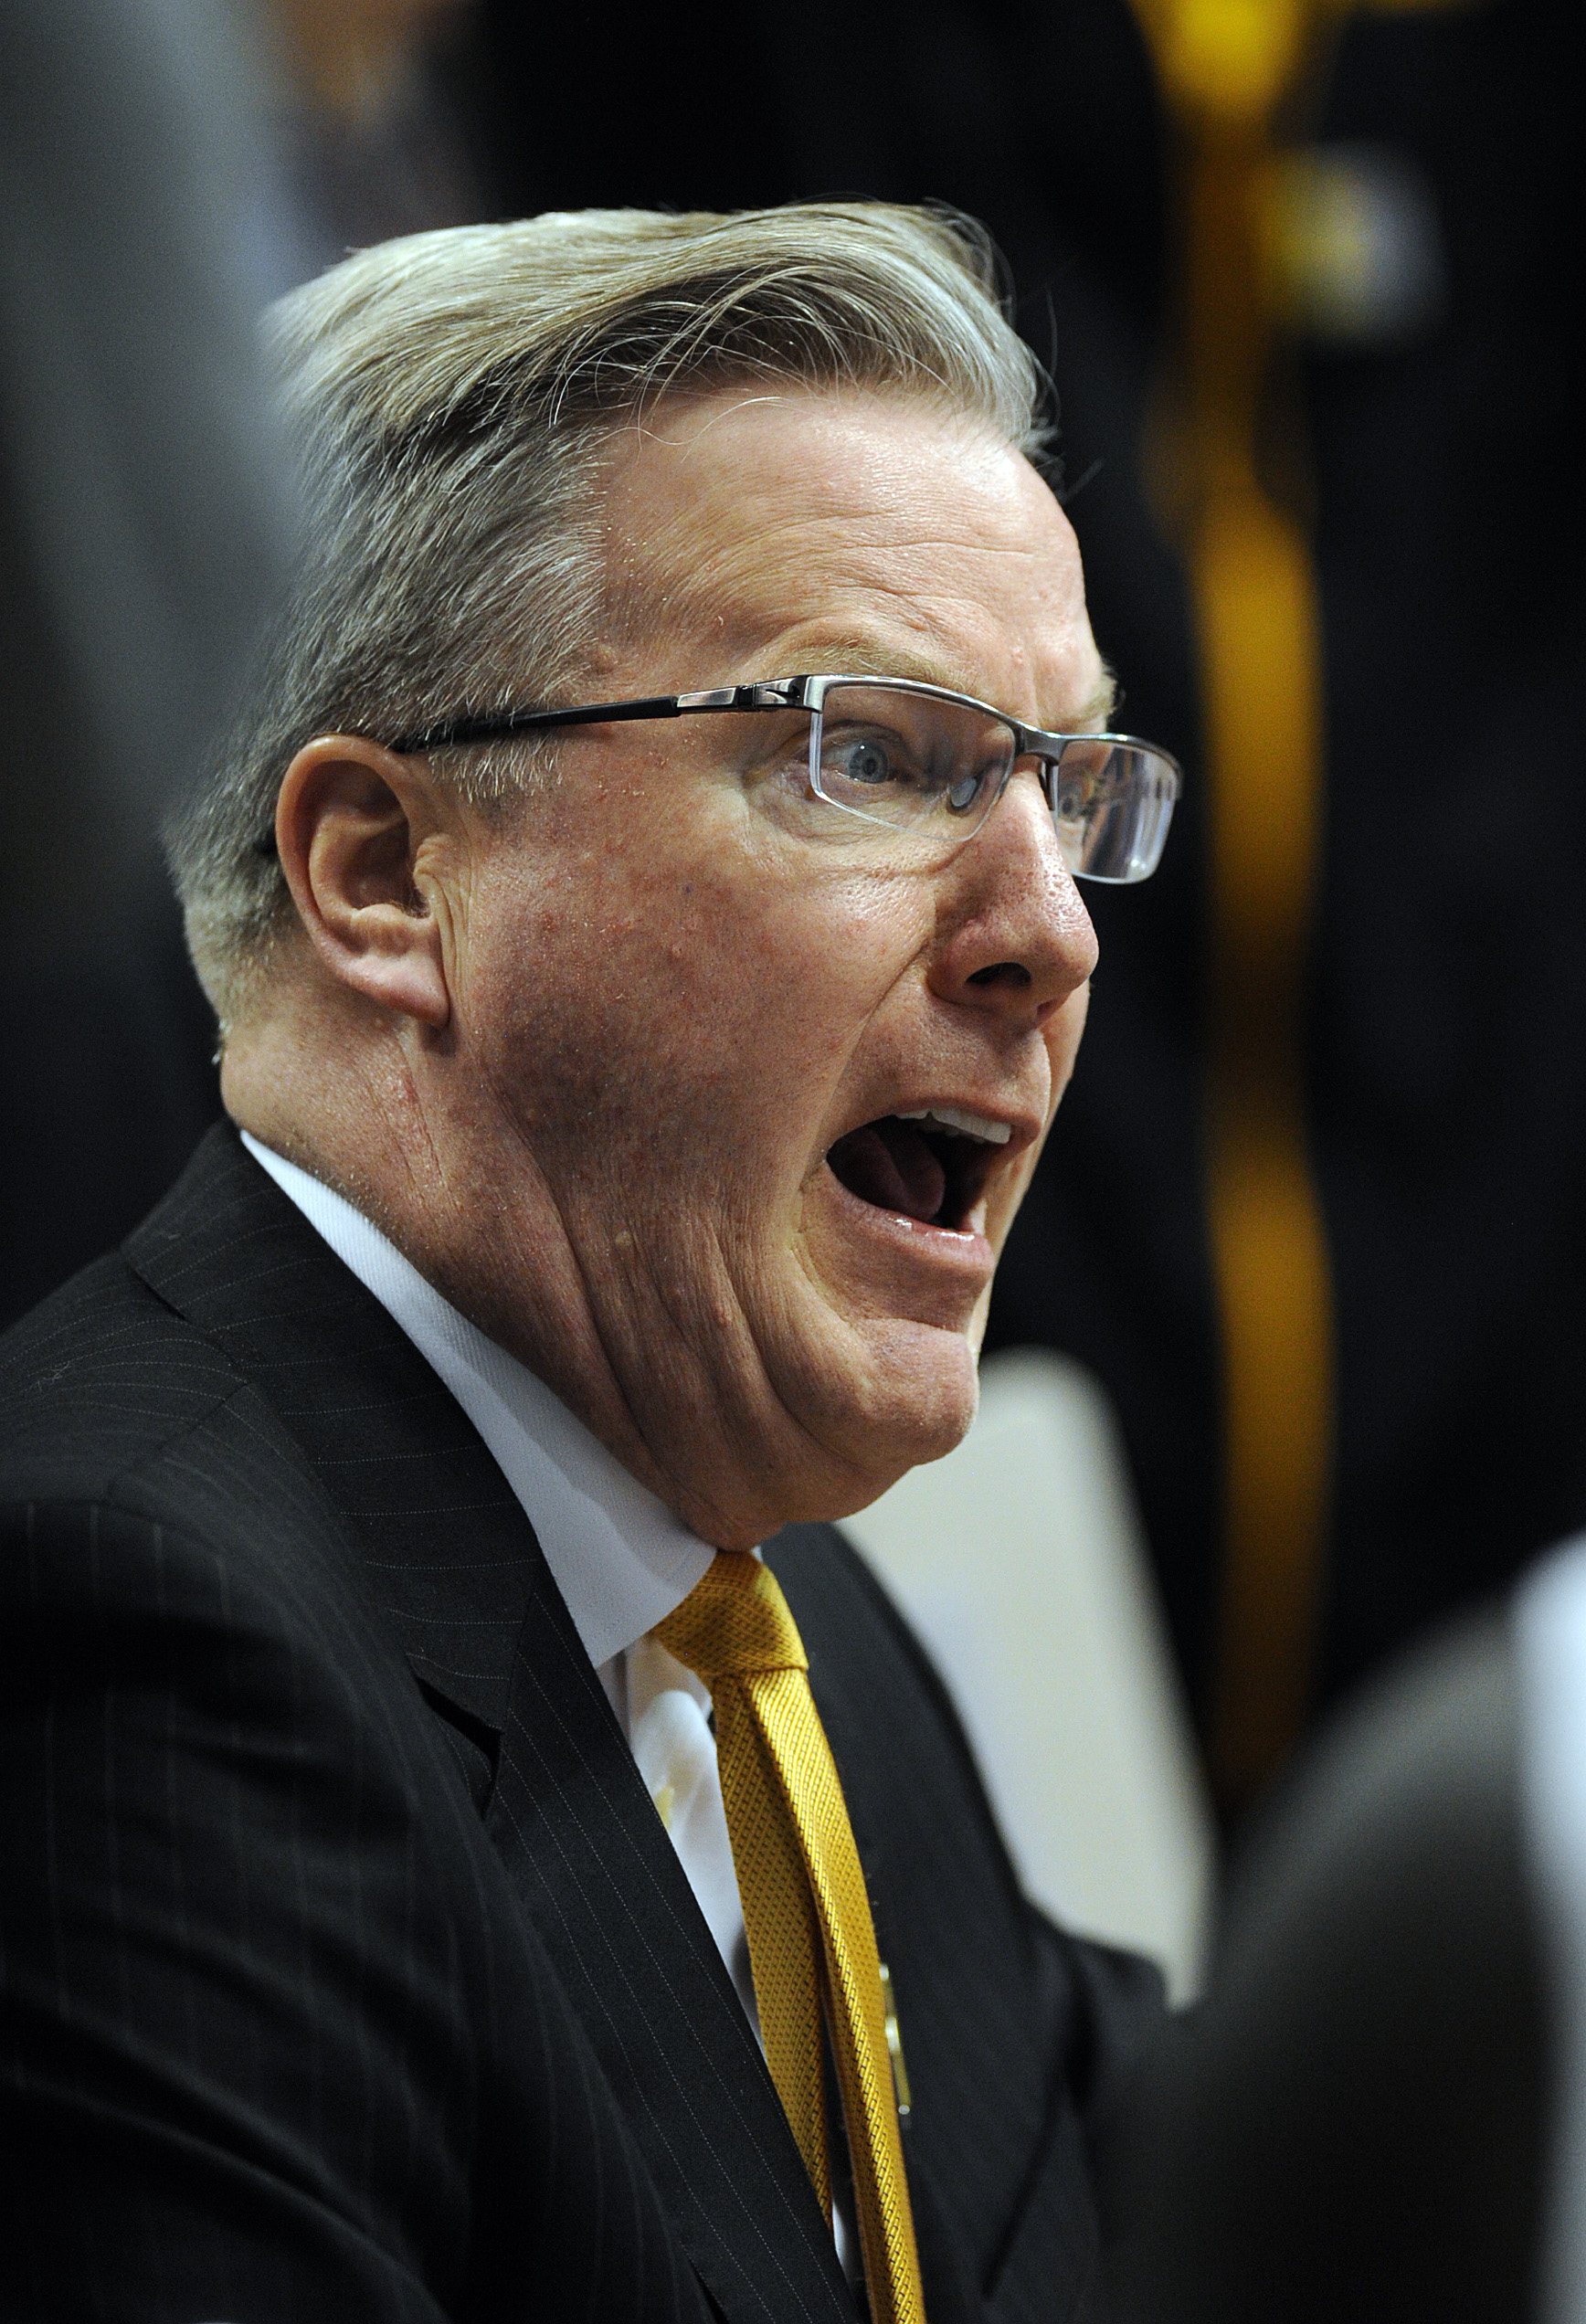 Mar 10, 2016; Indianapolis, IN, USA; Iowa Hawkeyes head coach Fran McCaffery yells at his players in a huddle during a first half timeout against the Illinois Fighting Illini during the Big Ten Conference tournament at Bankers Life Fieldhouse. Mandatory Credit: Thomas Joseph-USA TODAY Sports